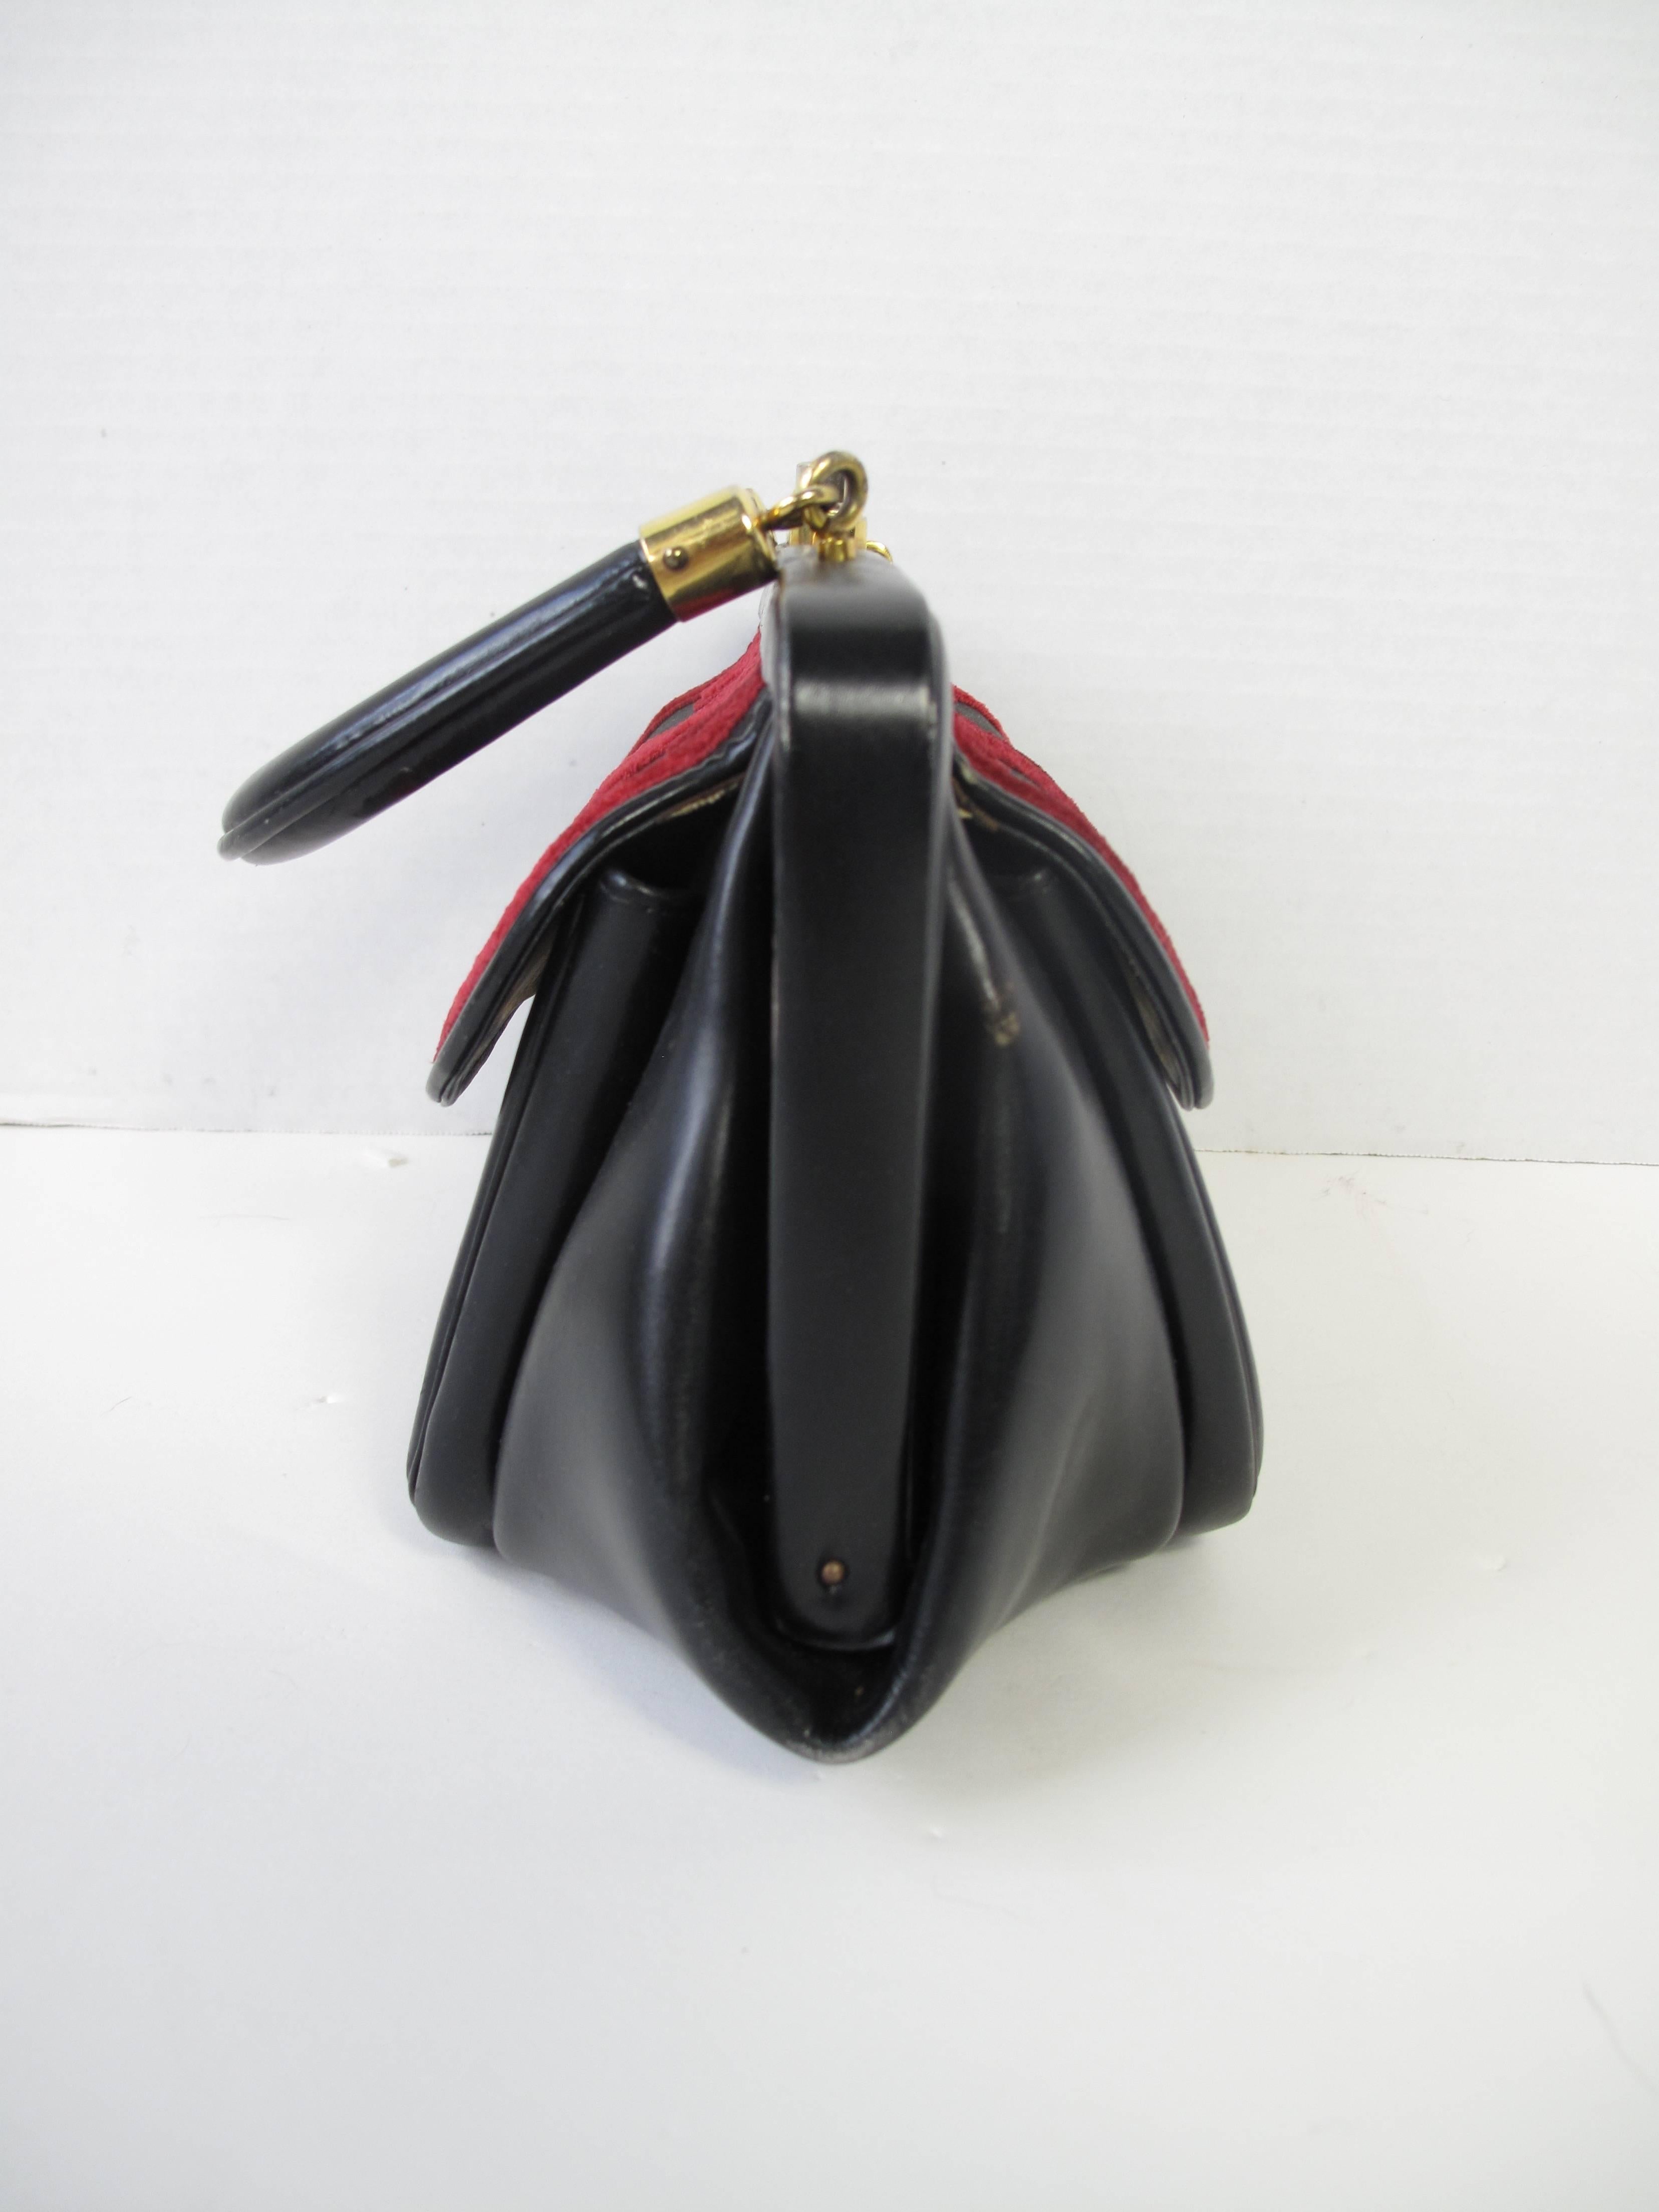 Roberta di Camerino black leather bag with red velvet.  Condition: Very good. 
